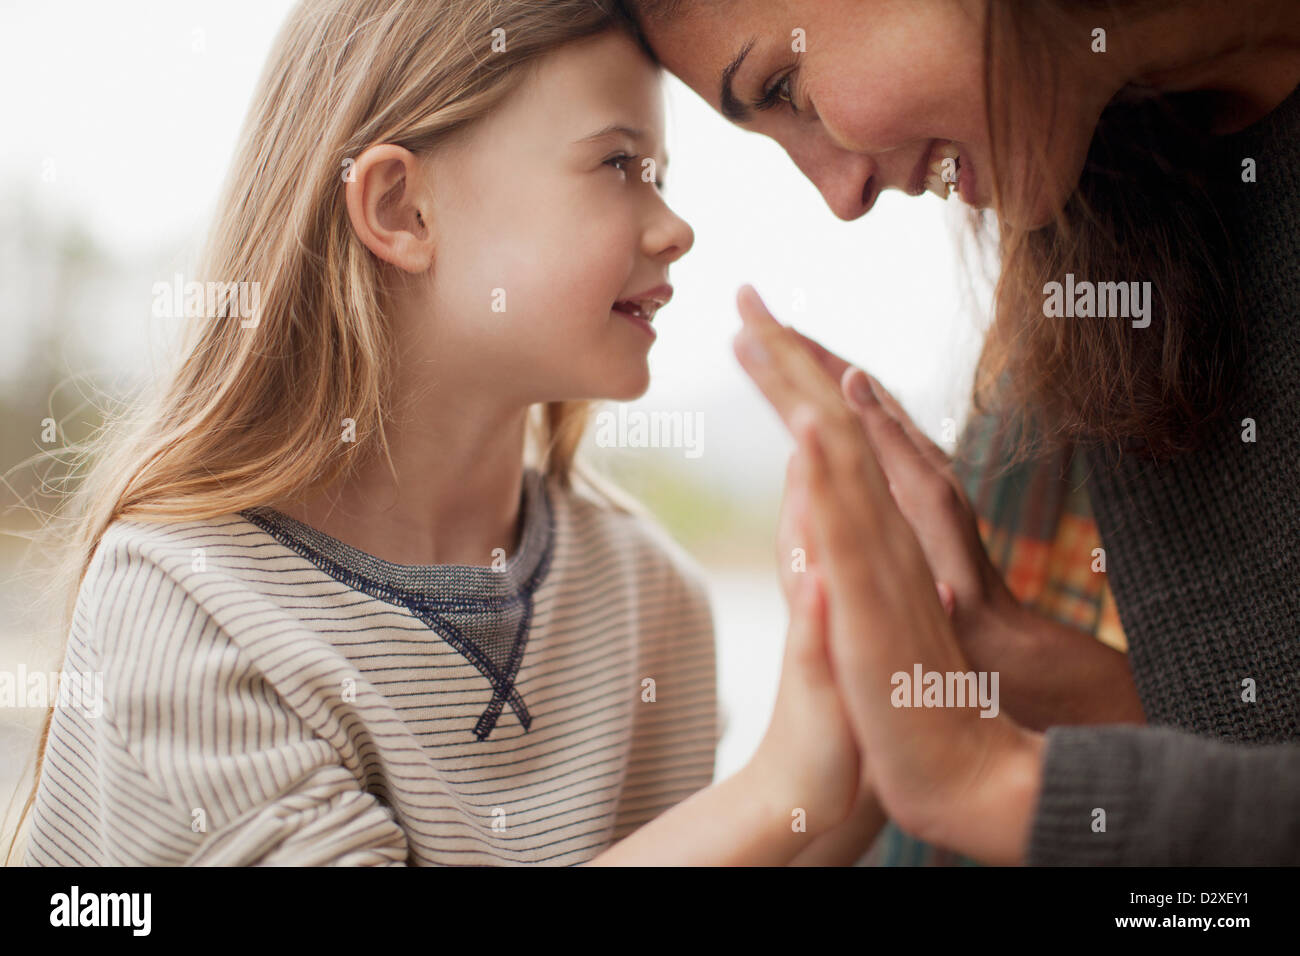 Close up of mother and daughter holding hands Stock Photo